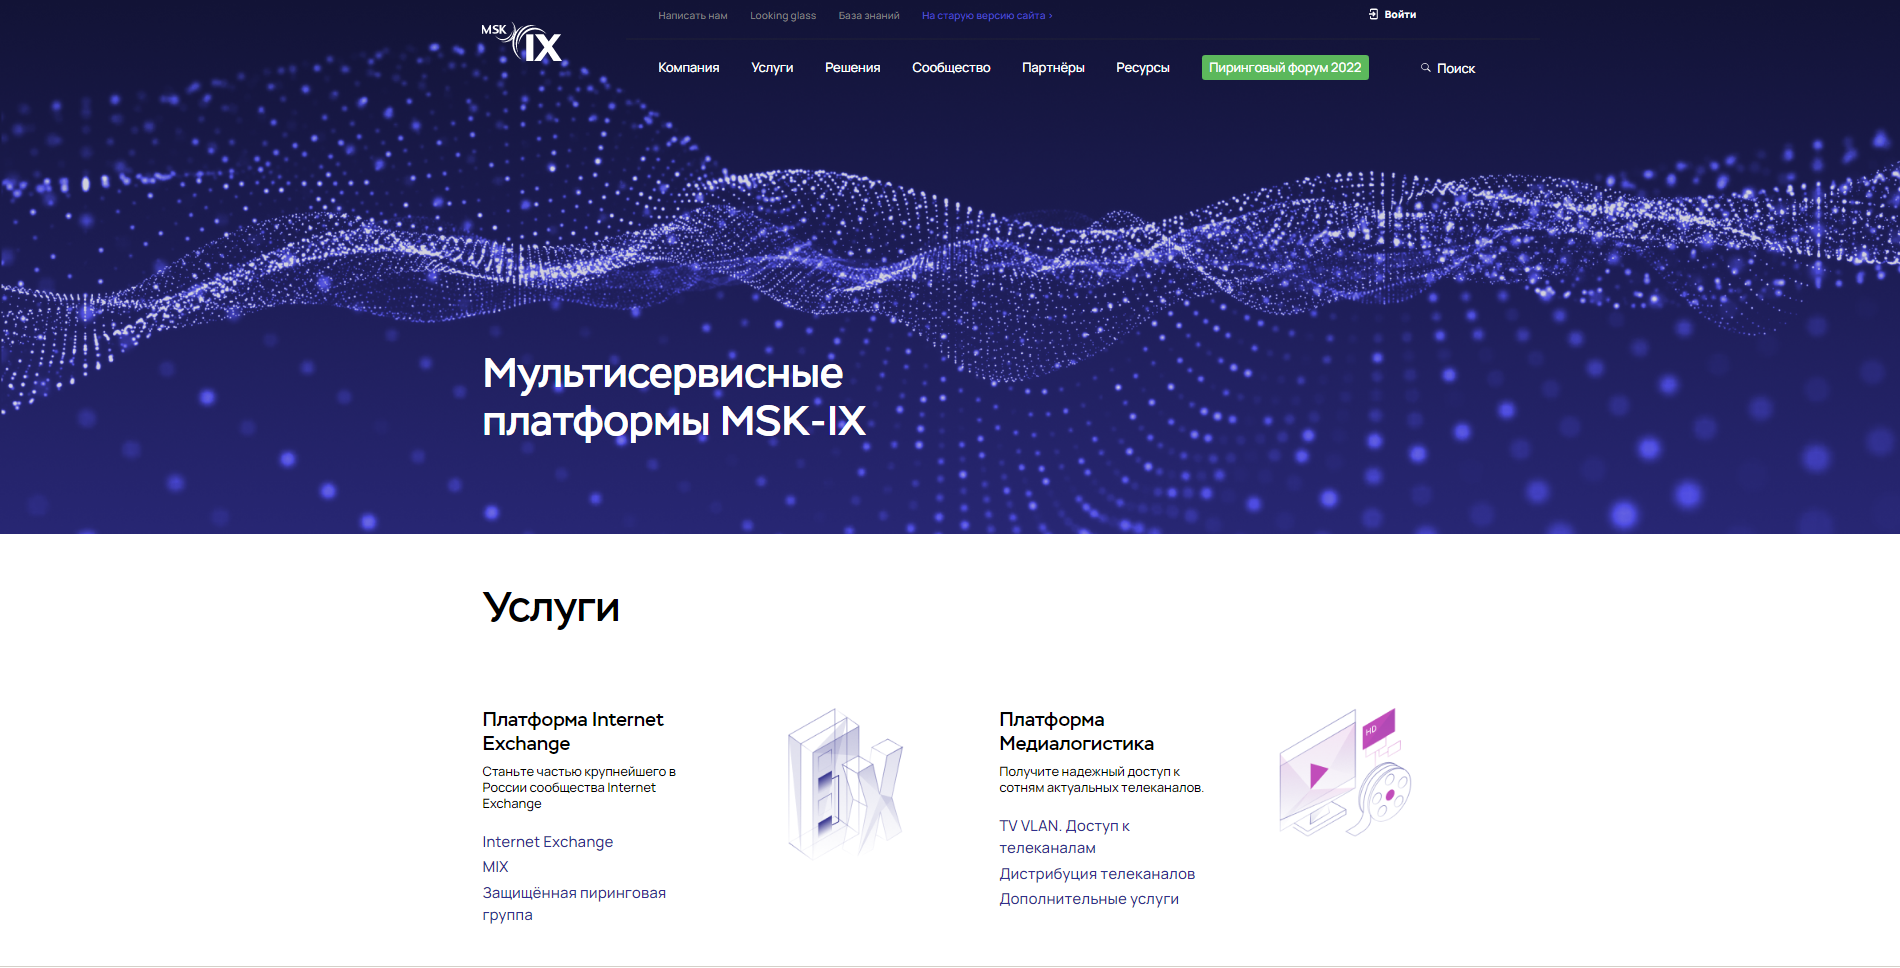 MSK-IX celebrates New Year with a new website